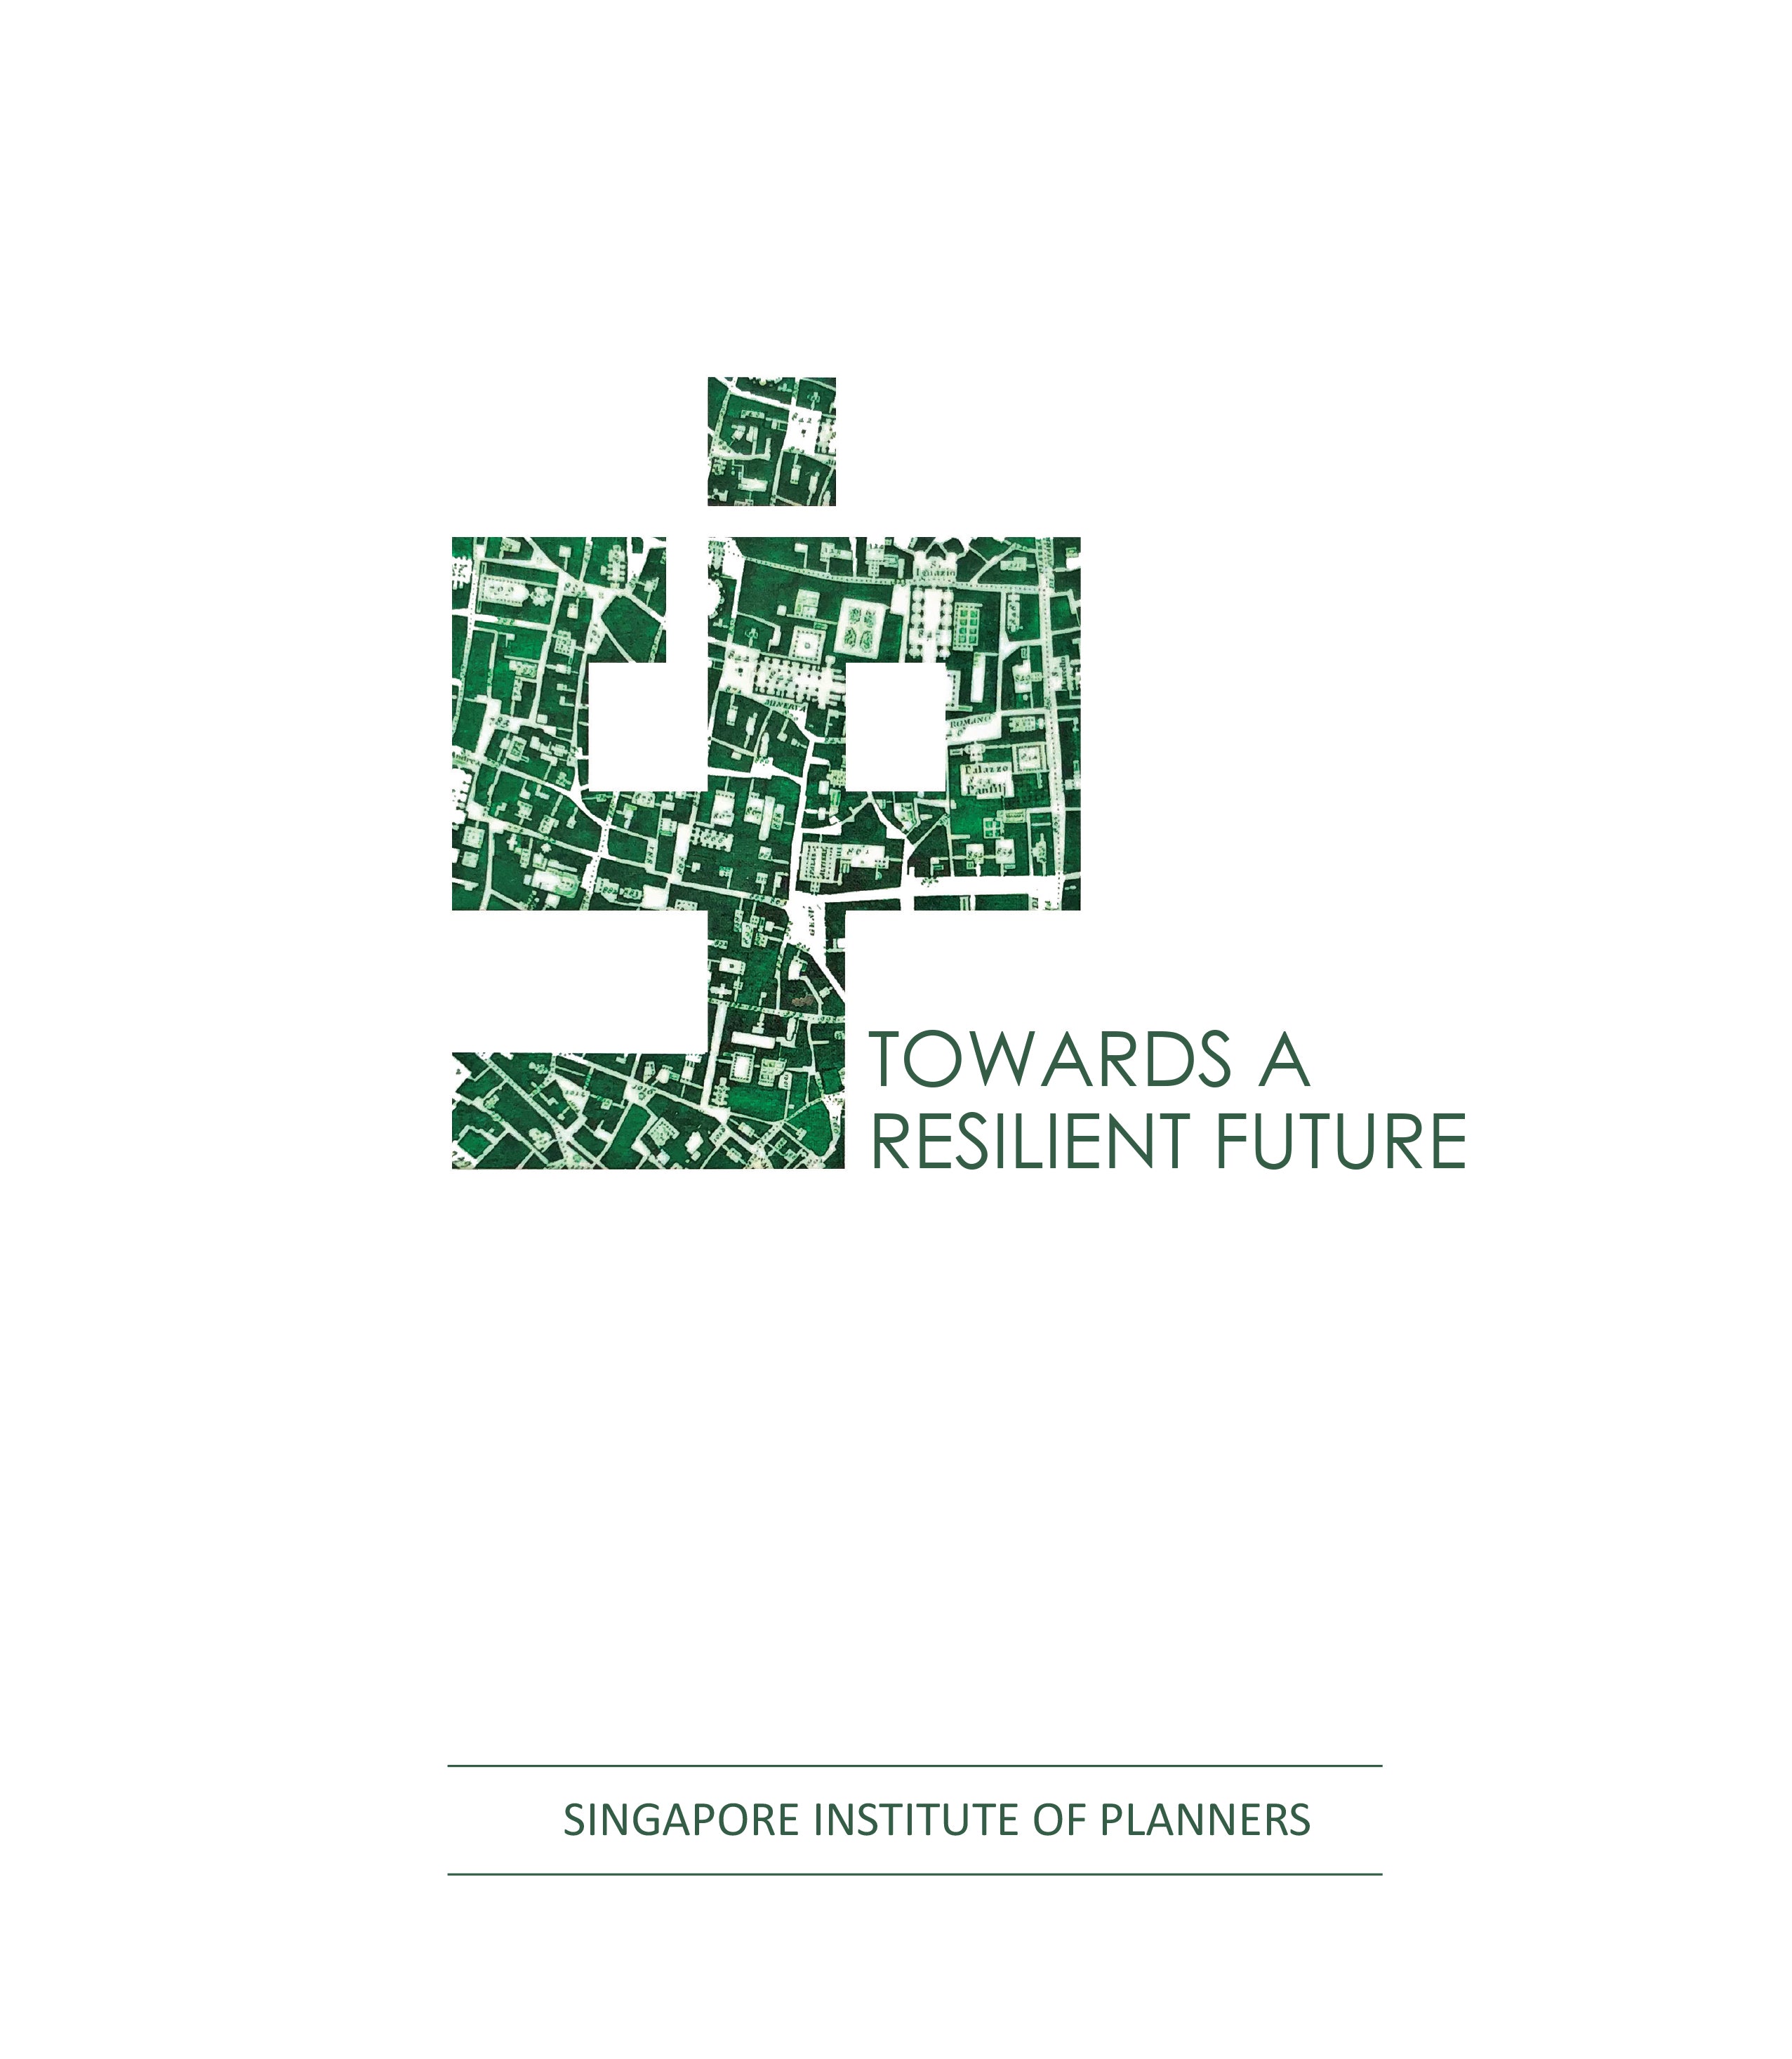 Towards a Resilient Future